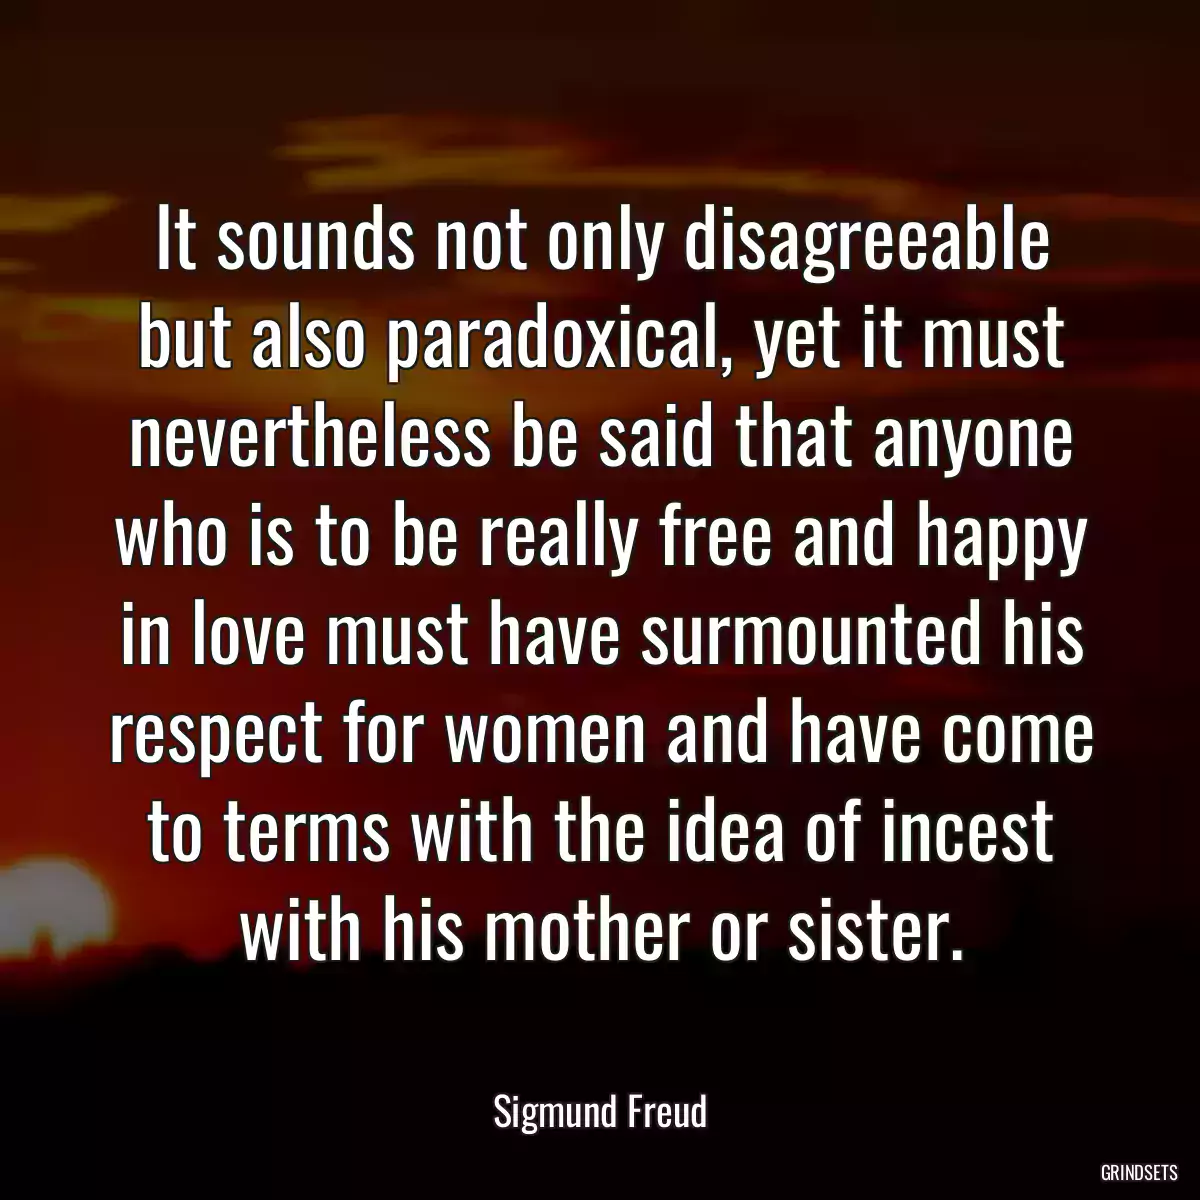 It sounds not only disagreeable but also paradoxical, yet it must nevertheless be said that anyone who is to be really free and happy in love must have surmounted his respect for women and have come to terms with the idea of incest with his mother or sister.